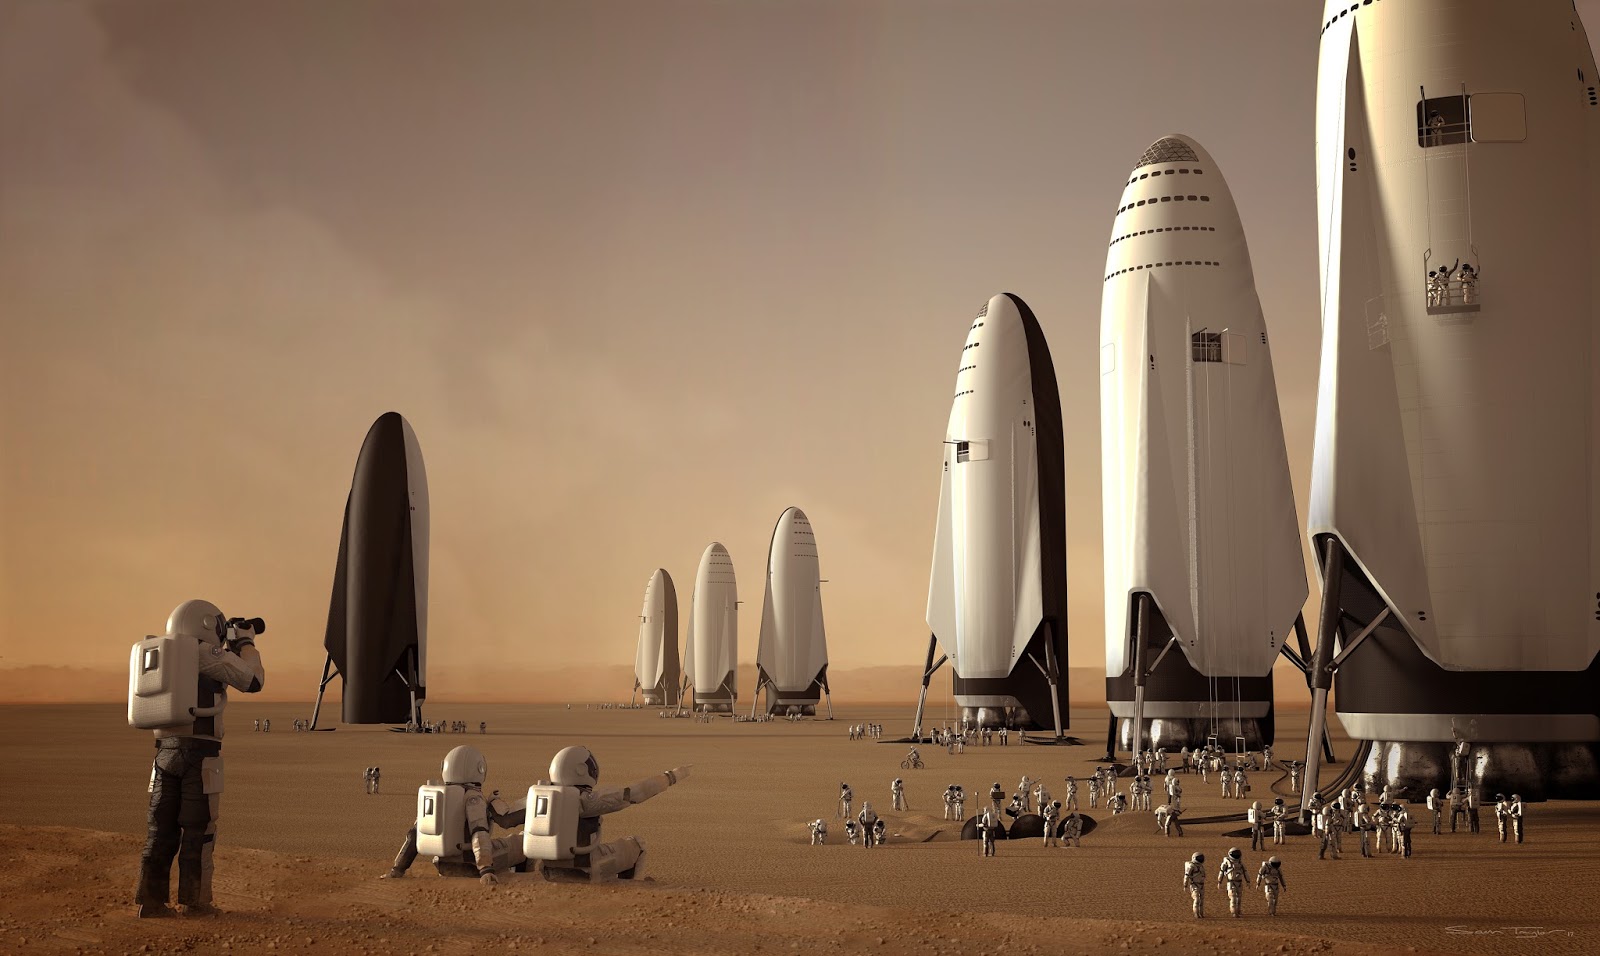 Fleet of SpaceX ITS spaceships on Mars by Sam Taylor